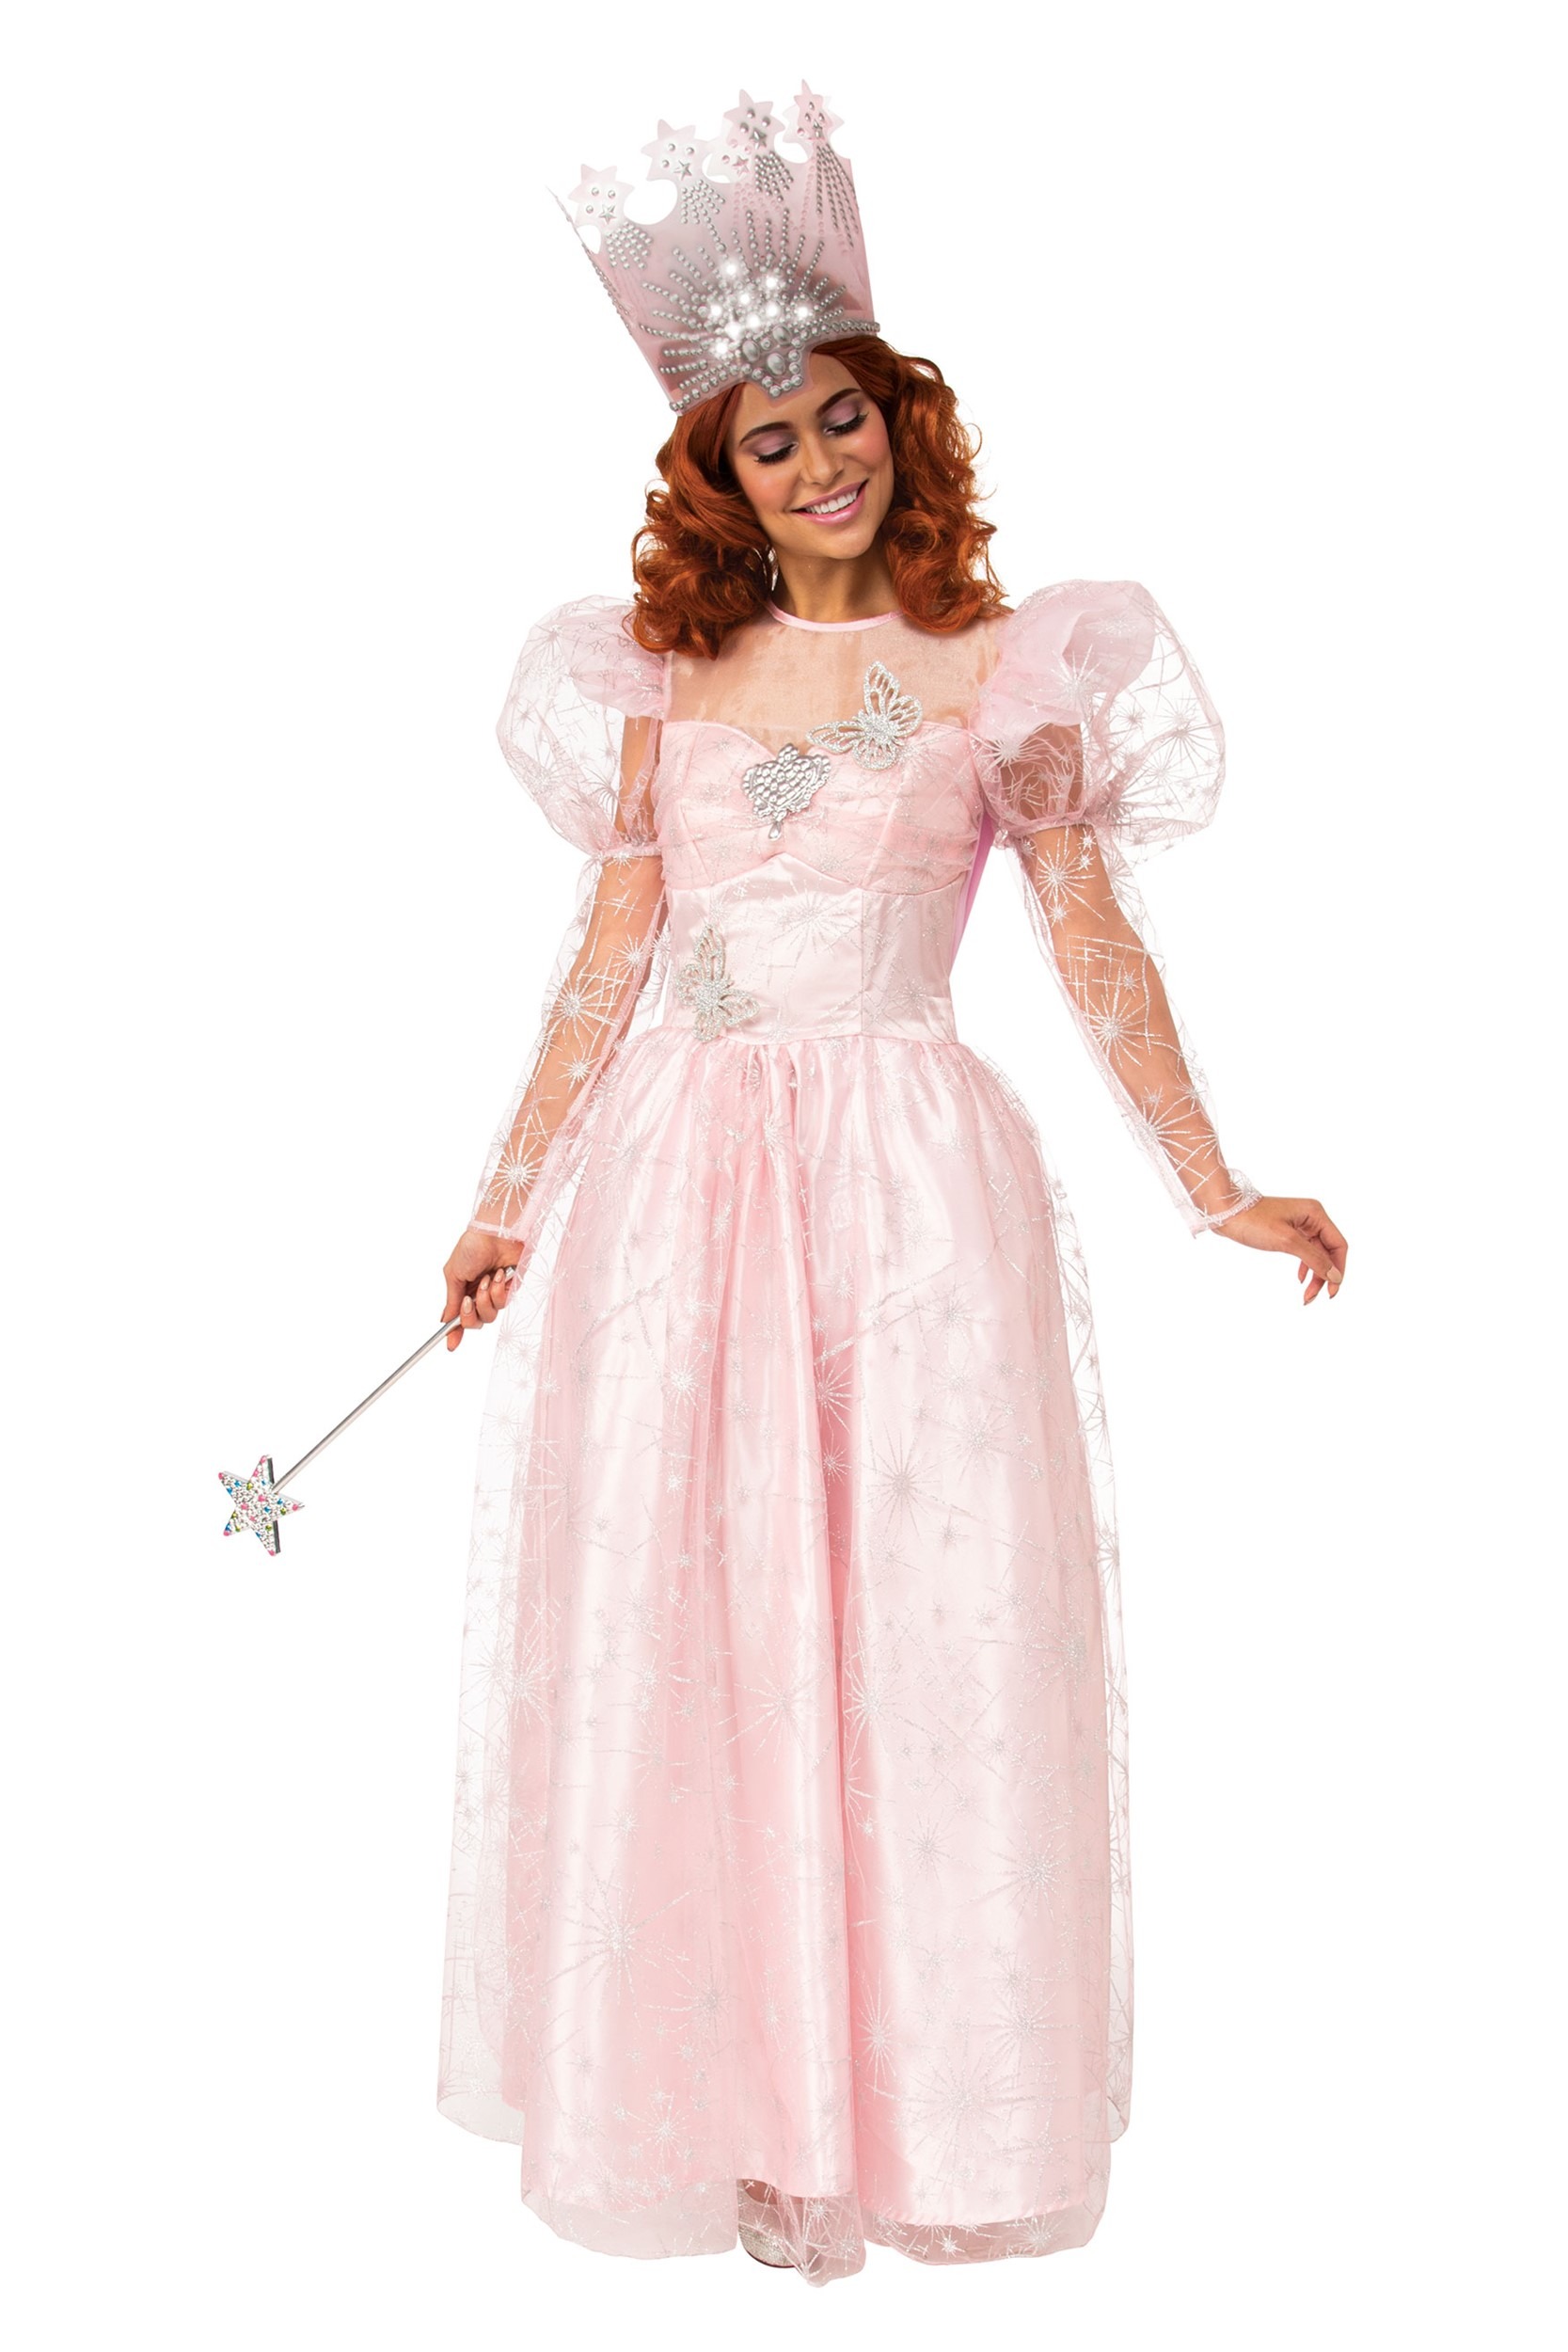 Image of Glinda the Good Witch Women's Deluxe Costume ID RU701927-S